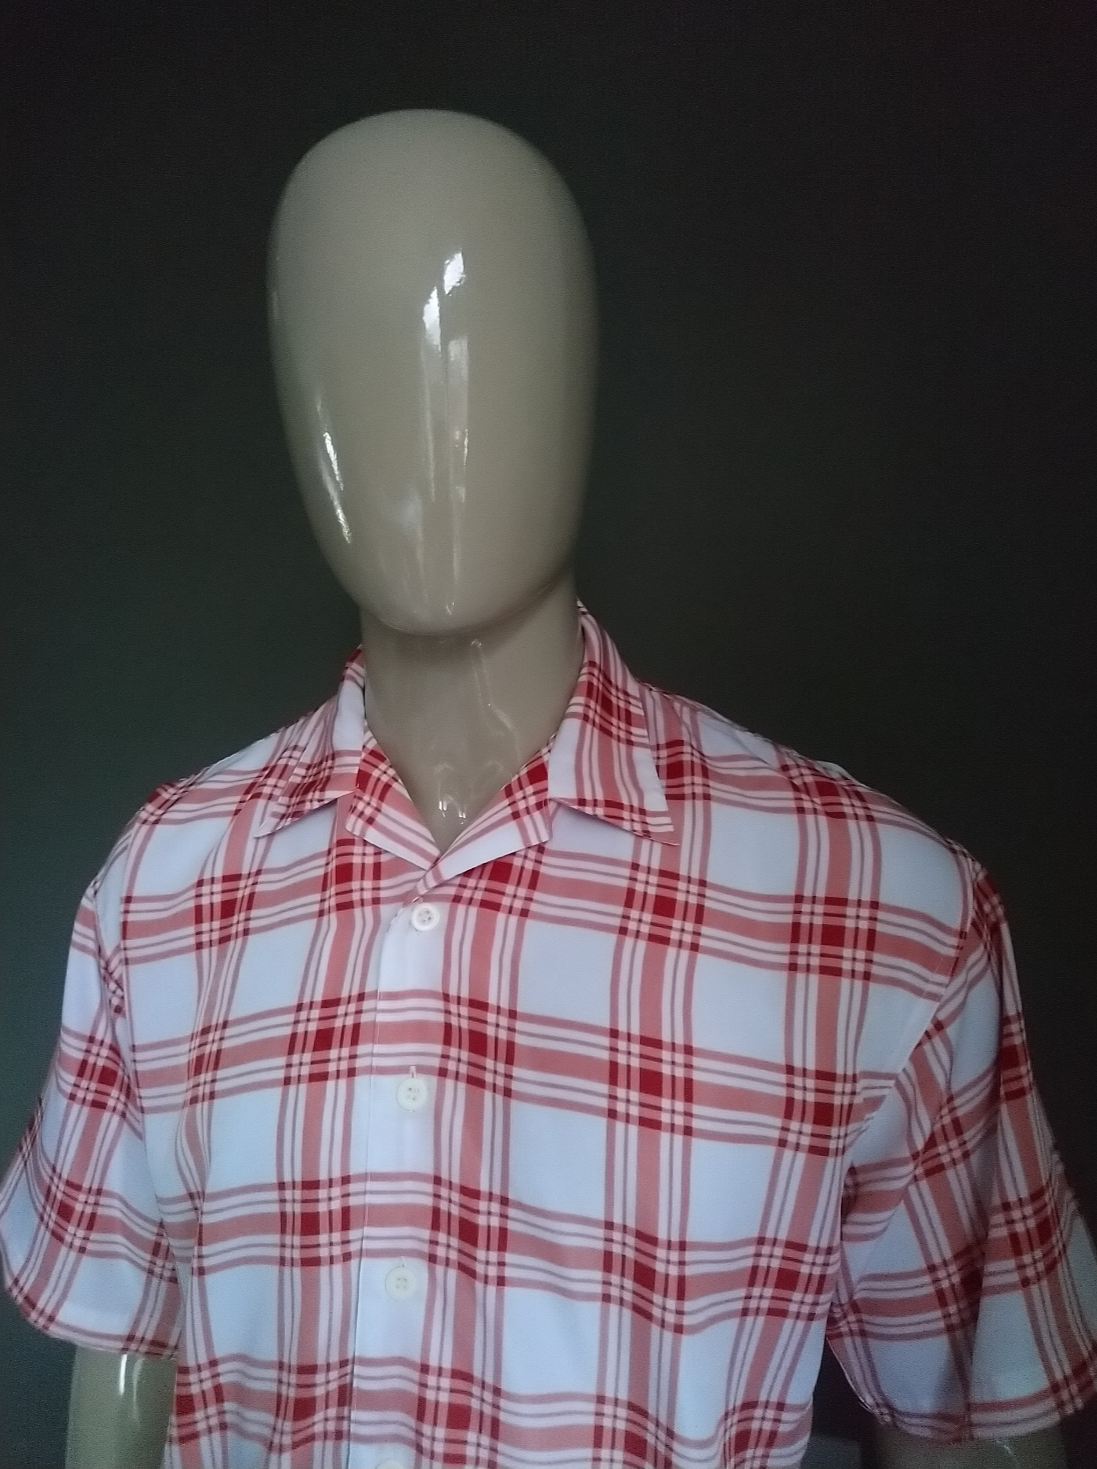 Supercool shirt with short sleeves. Red pink white checkered motif. Size L.